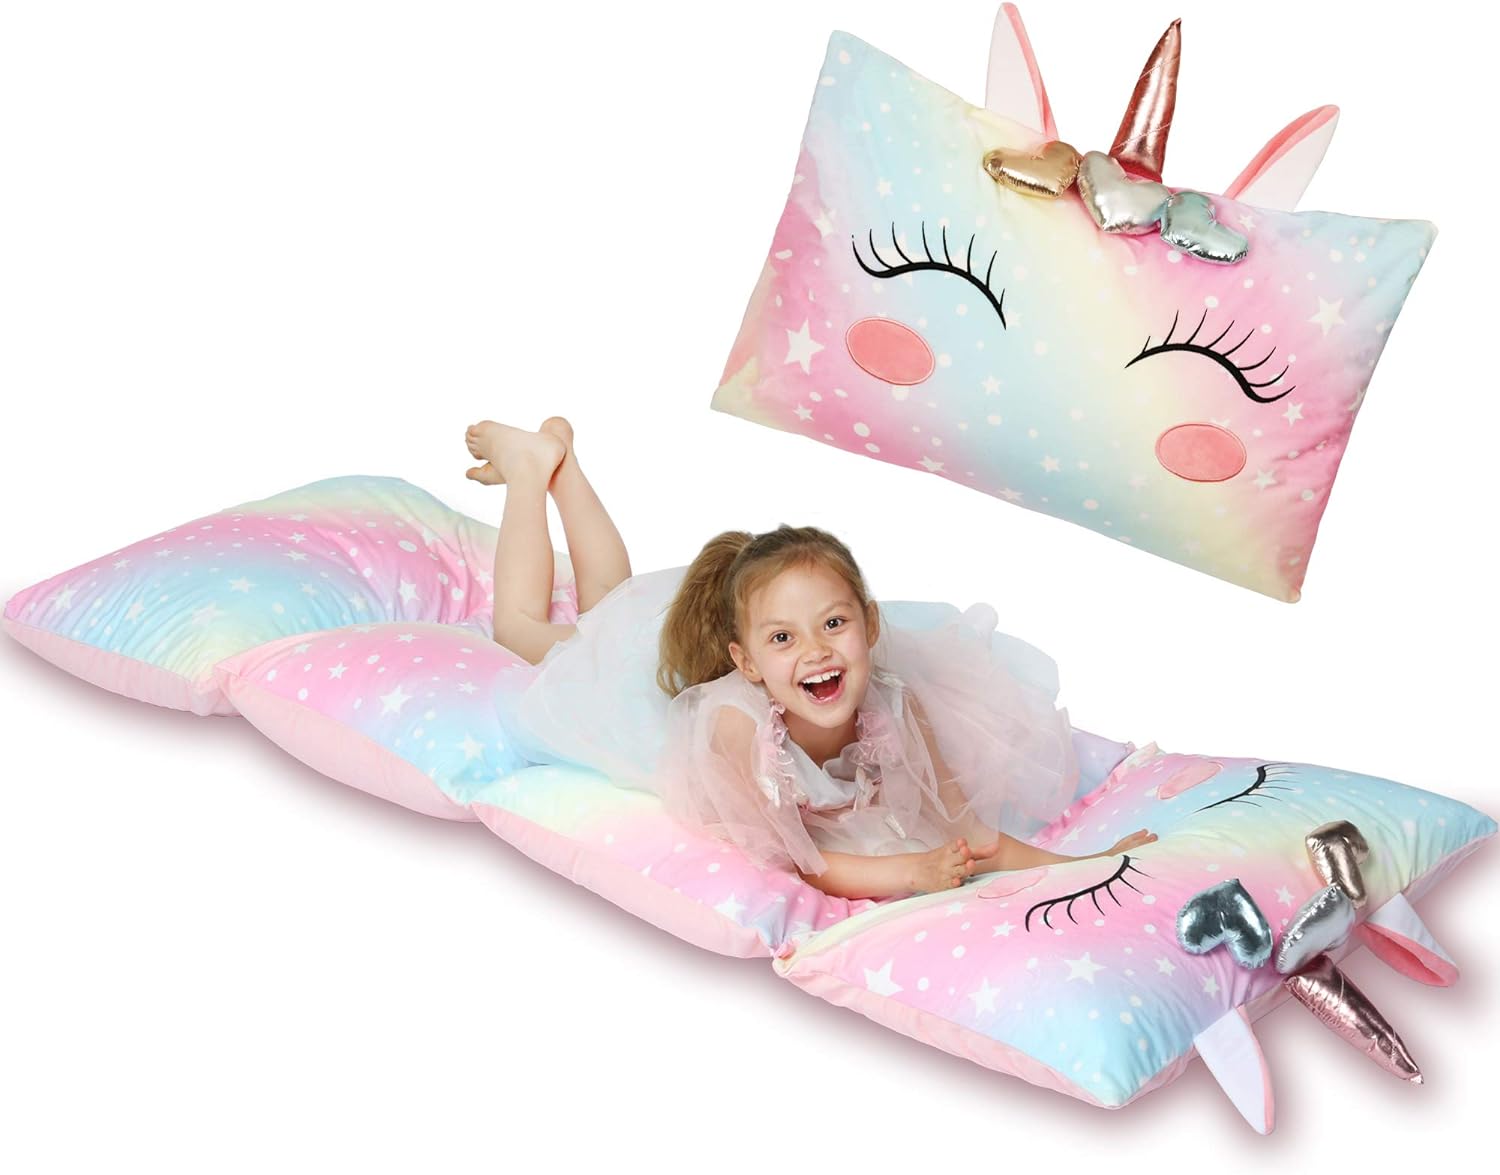 Yoweenton Unicorn Kids Floor Pillows Bed Seat Cover Queen Size Fold Out Lounger Chair Bed for Boys Girls Floor Cushion for Kids Room Decoration Pink Cover ONLY